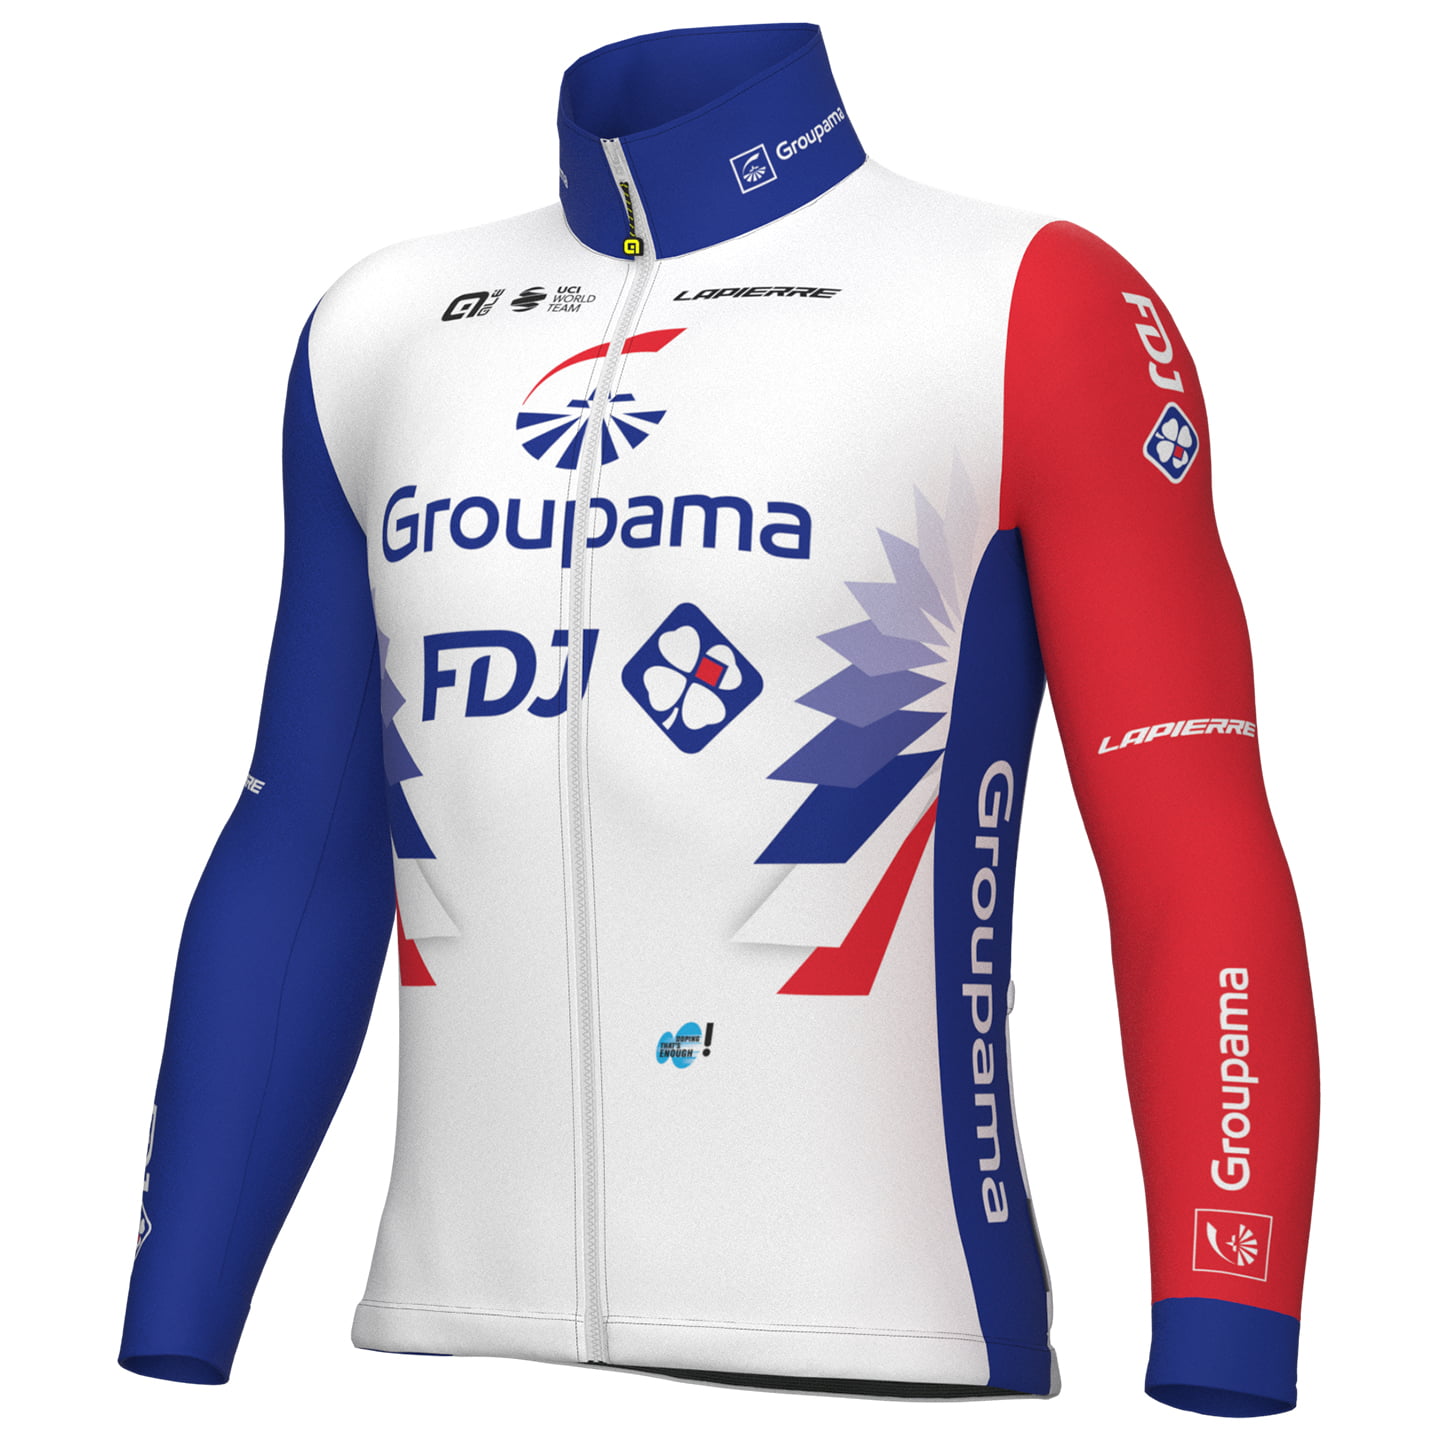 GROUPAMA - FDJ 2022 Thermal Jacket, for men, size S, Winter jacket, Cycling clothing